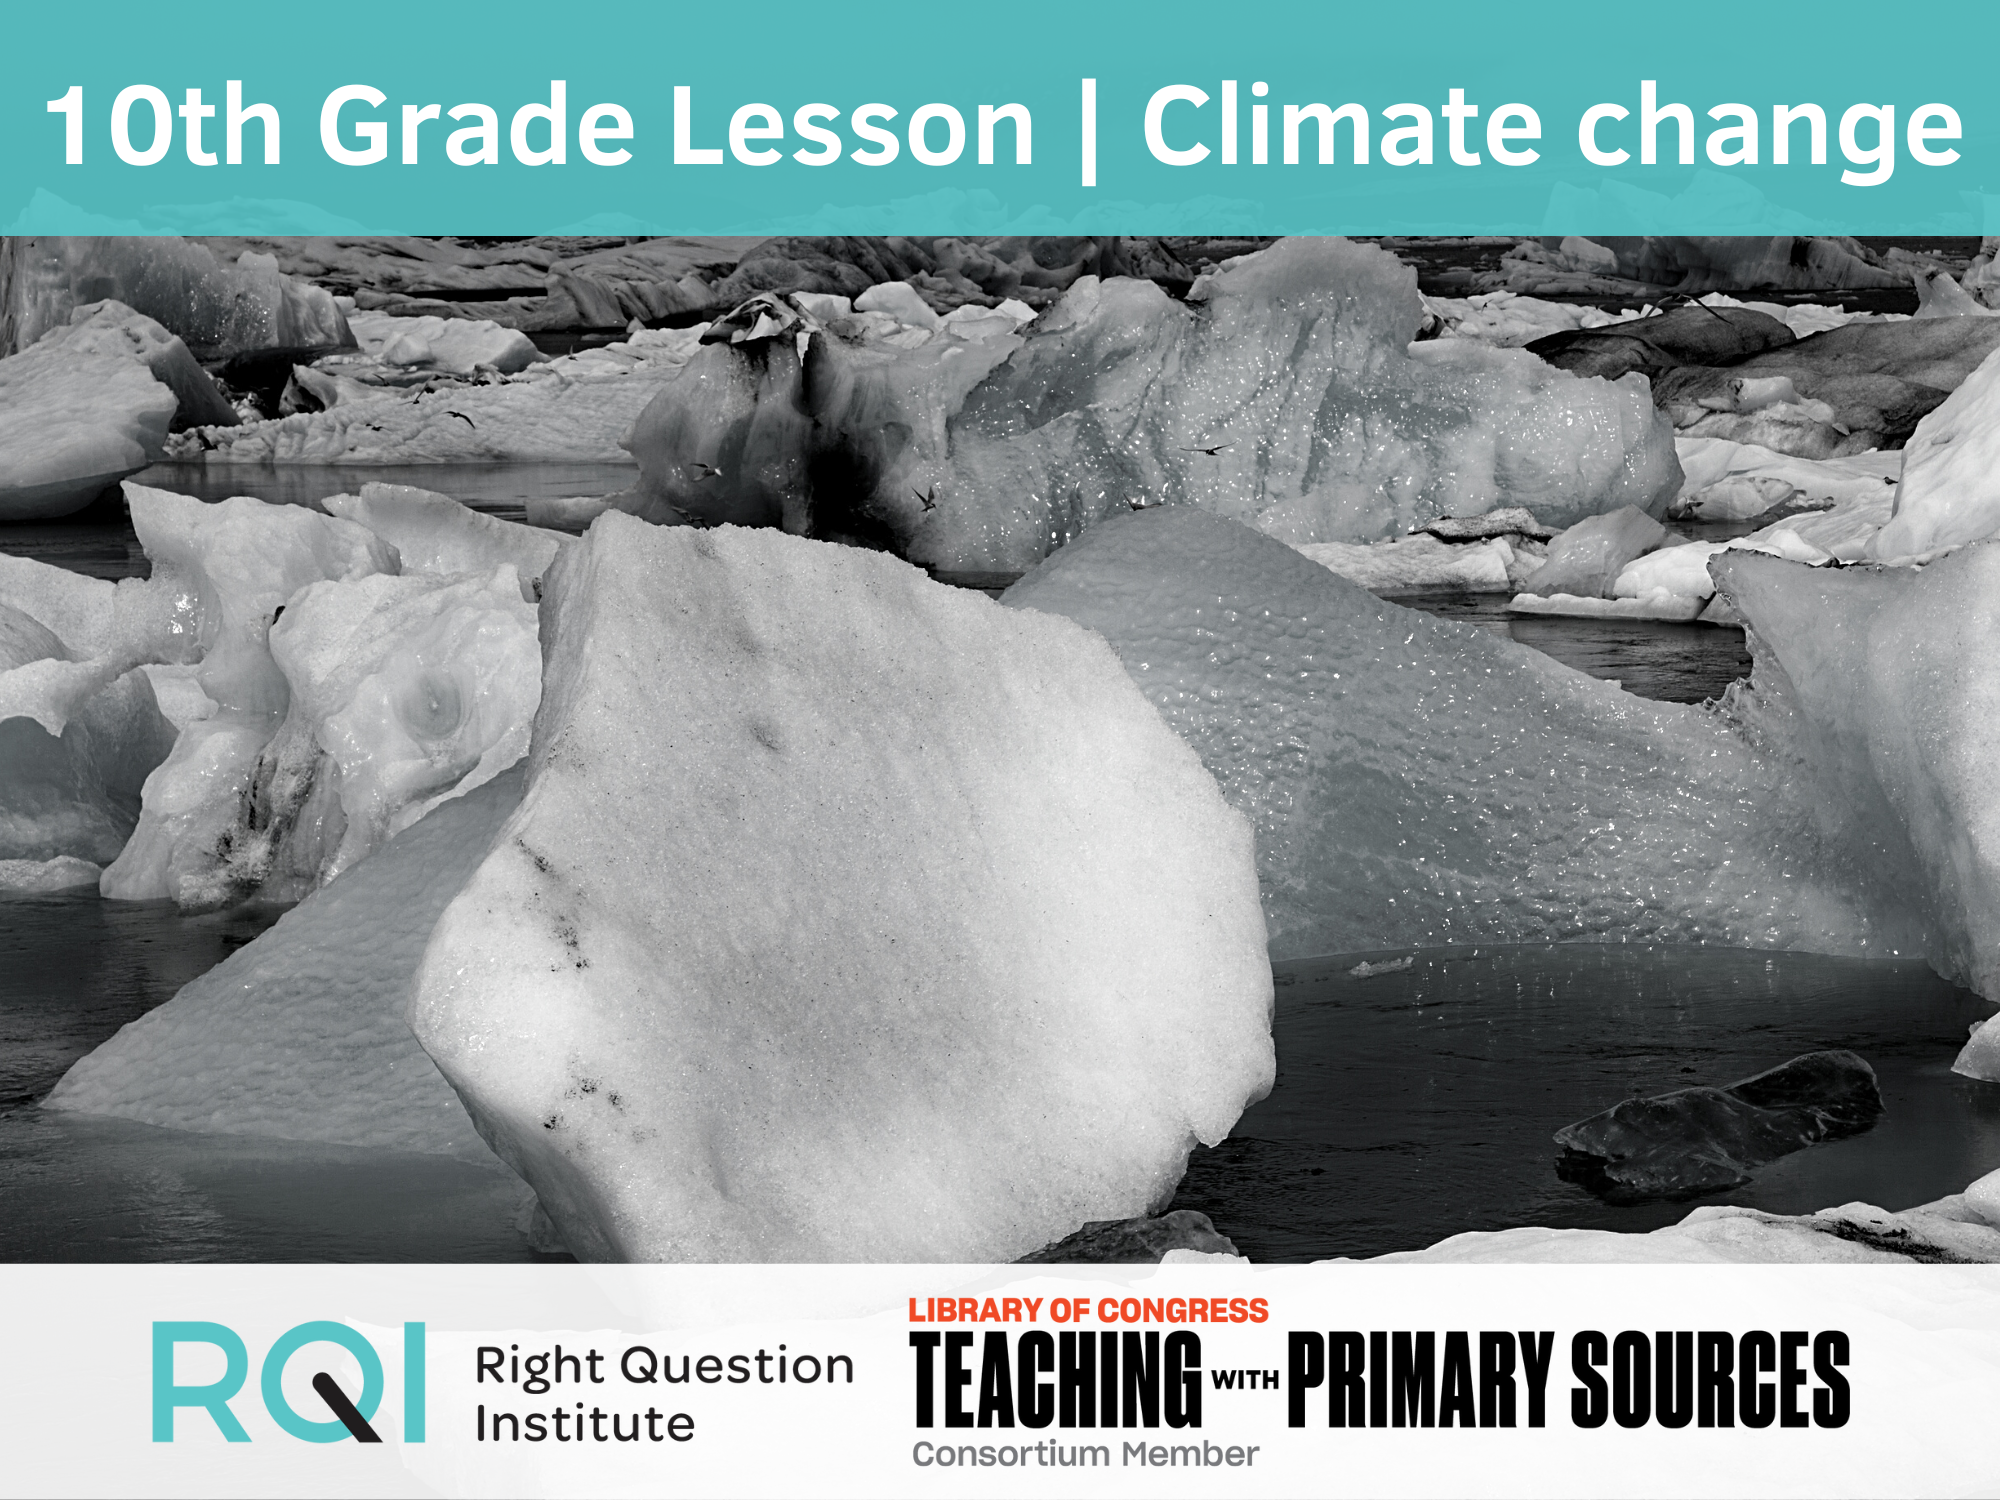 Lesson Snapshot: QFT & Primary Sources in a 10th Grade Science Class